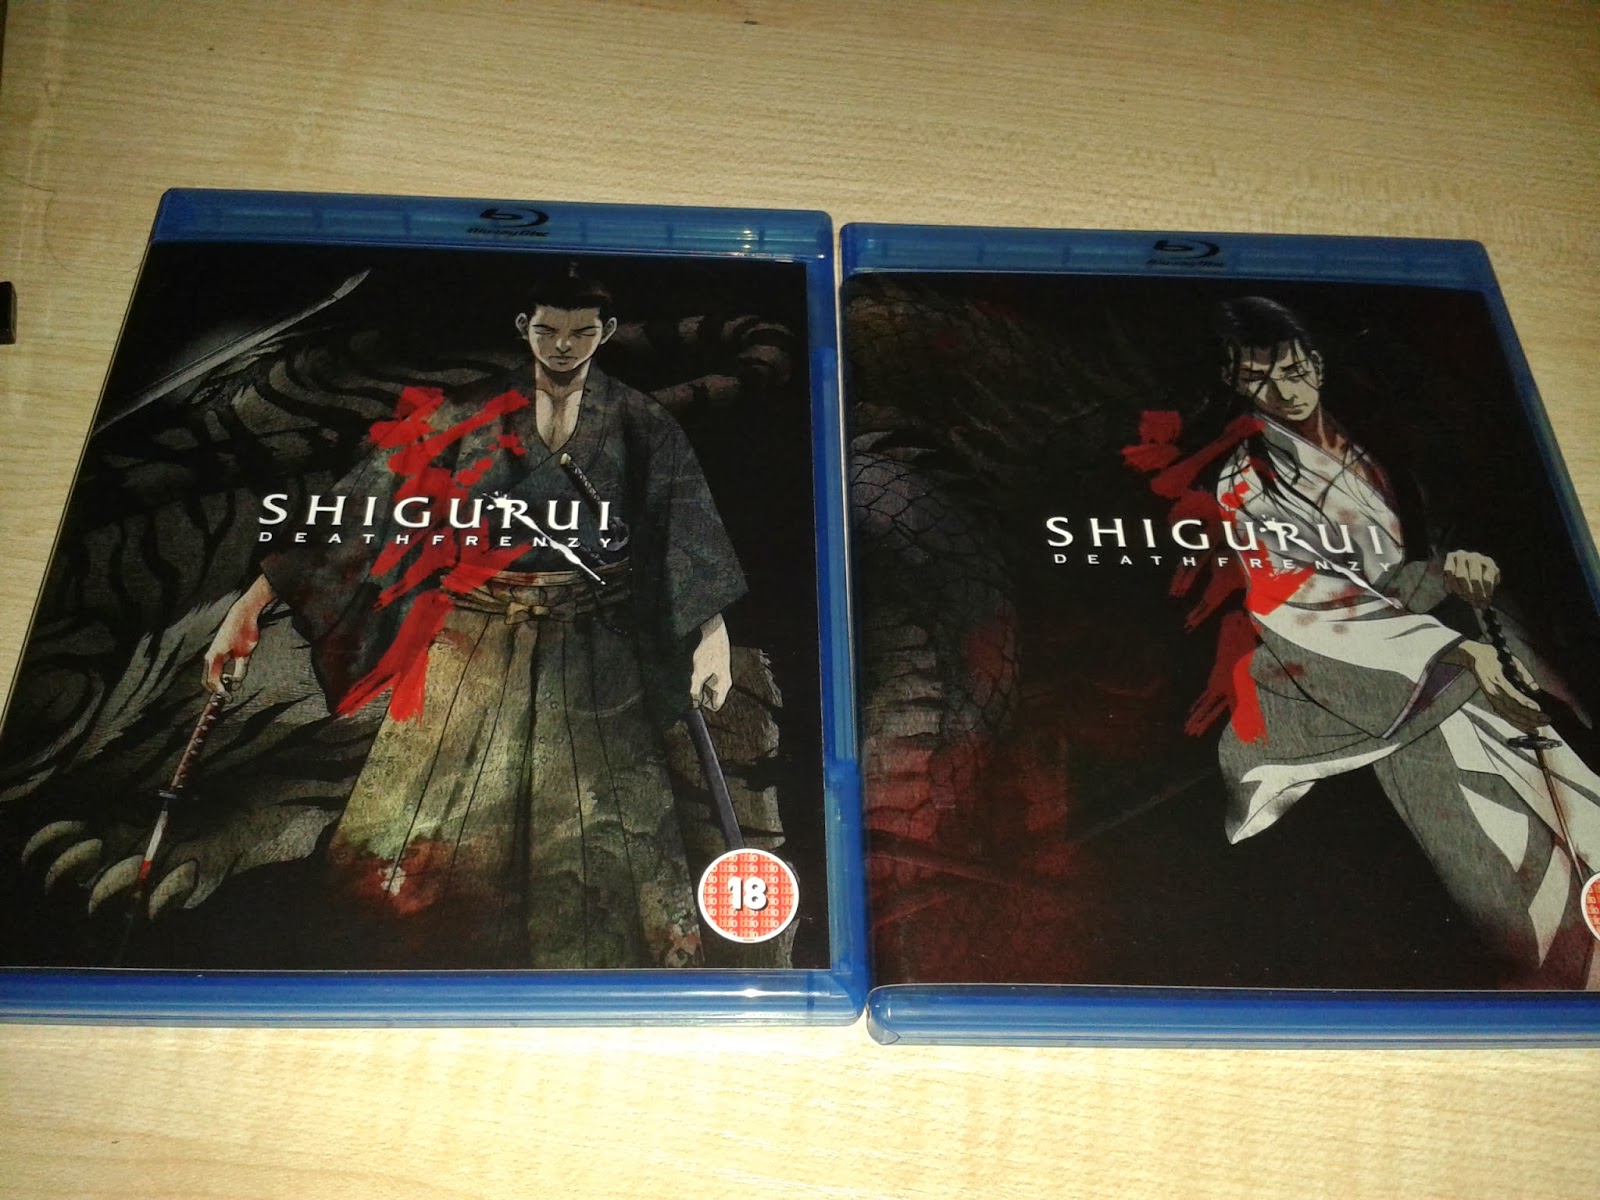 The Normanic Vault: Unboxing [UK]: Shigurui Death Frenzy - Complete Series:  Special Packaging Edition UK (Blu-ray)